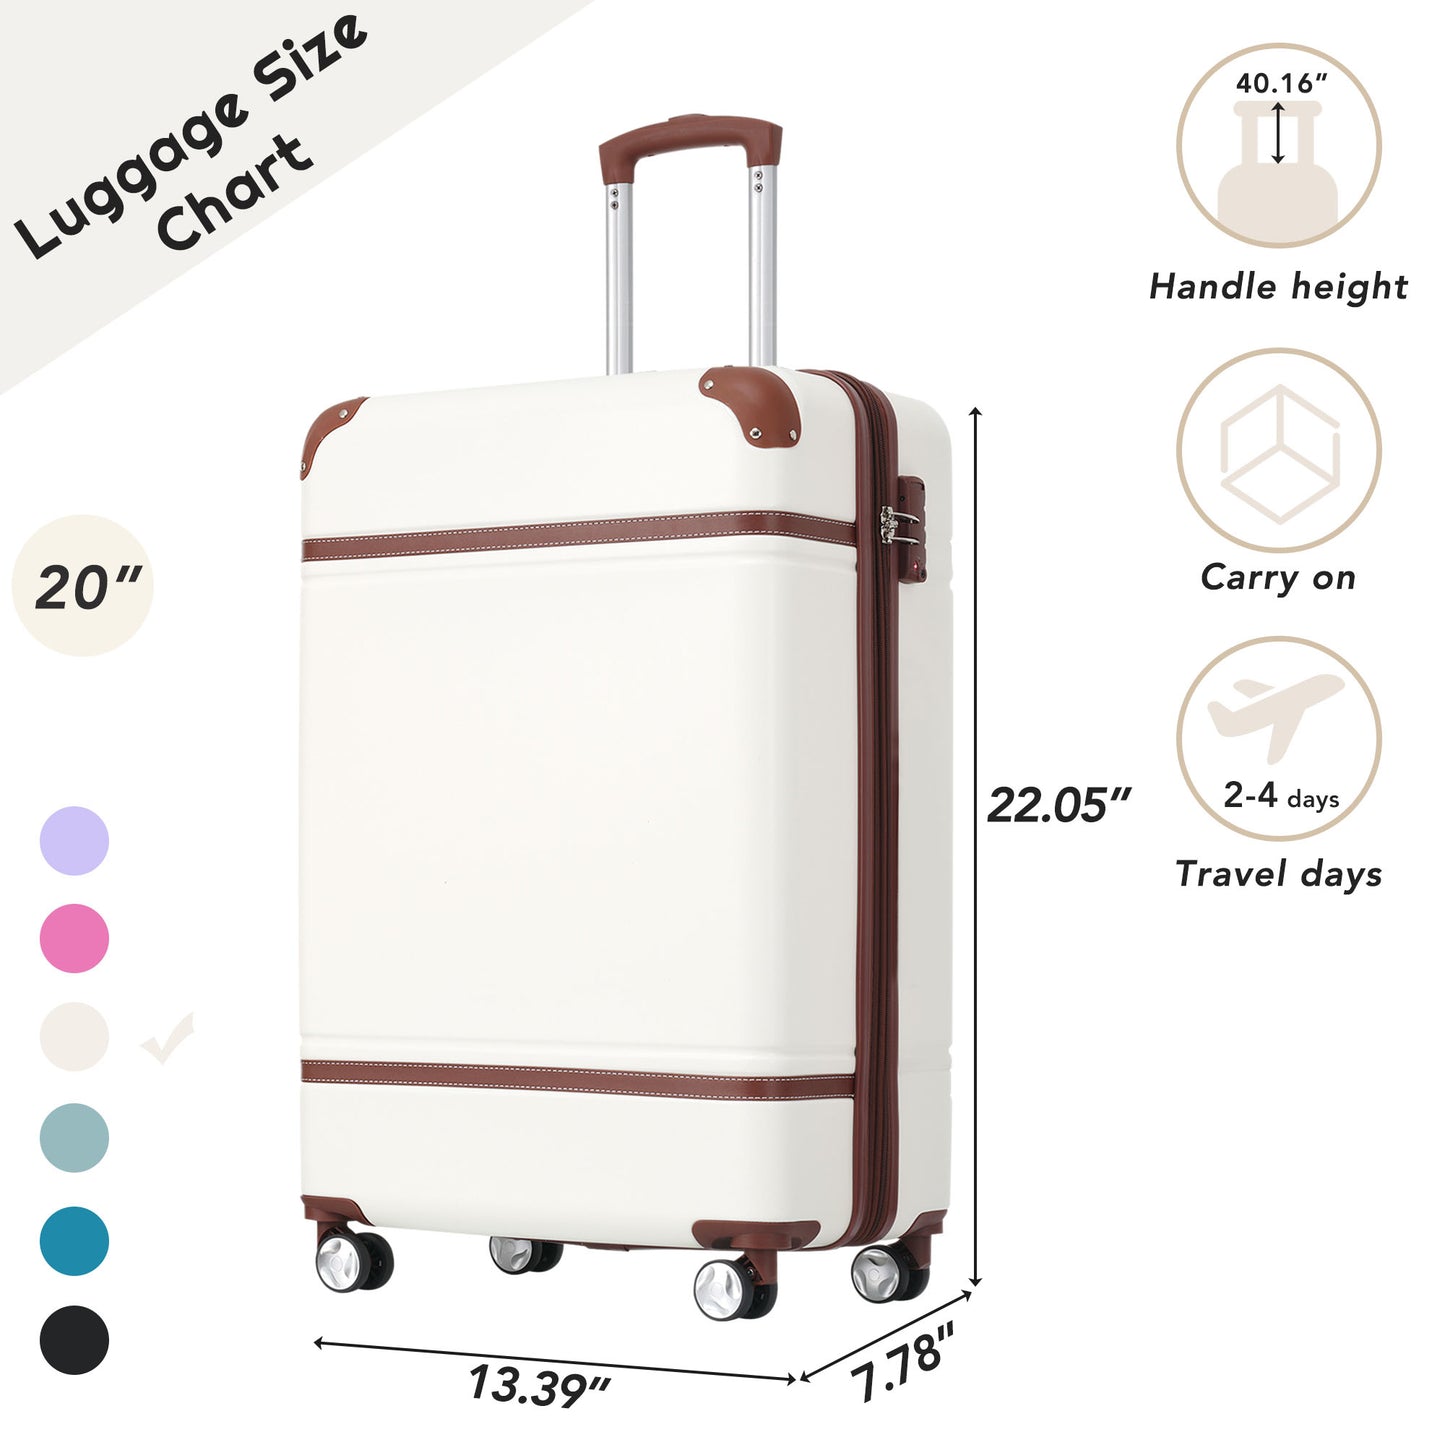 20 IN Luggage 1 Piece with TSA lock , Lightweight Suitcase Spinner Wheels,Carry on Vintage Luggage,White